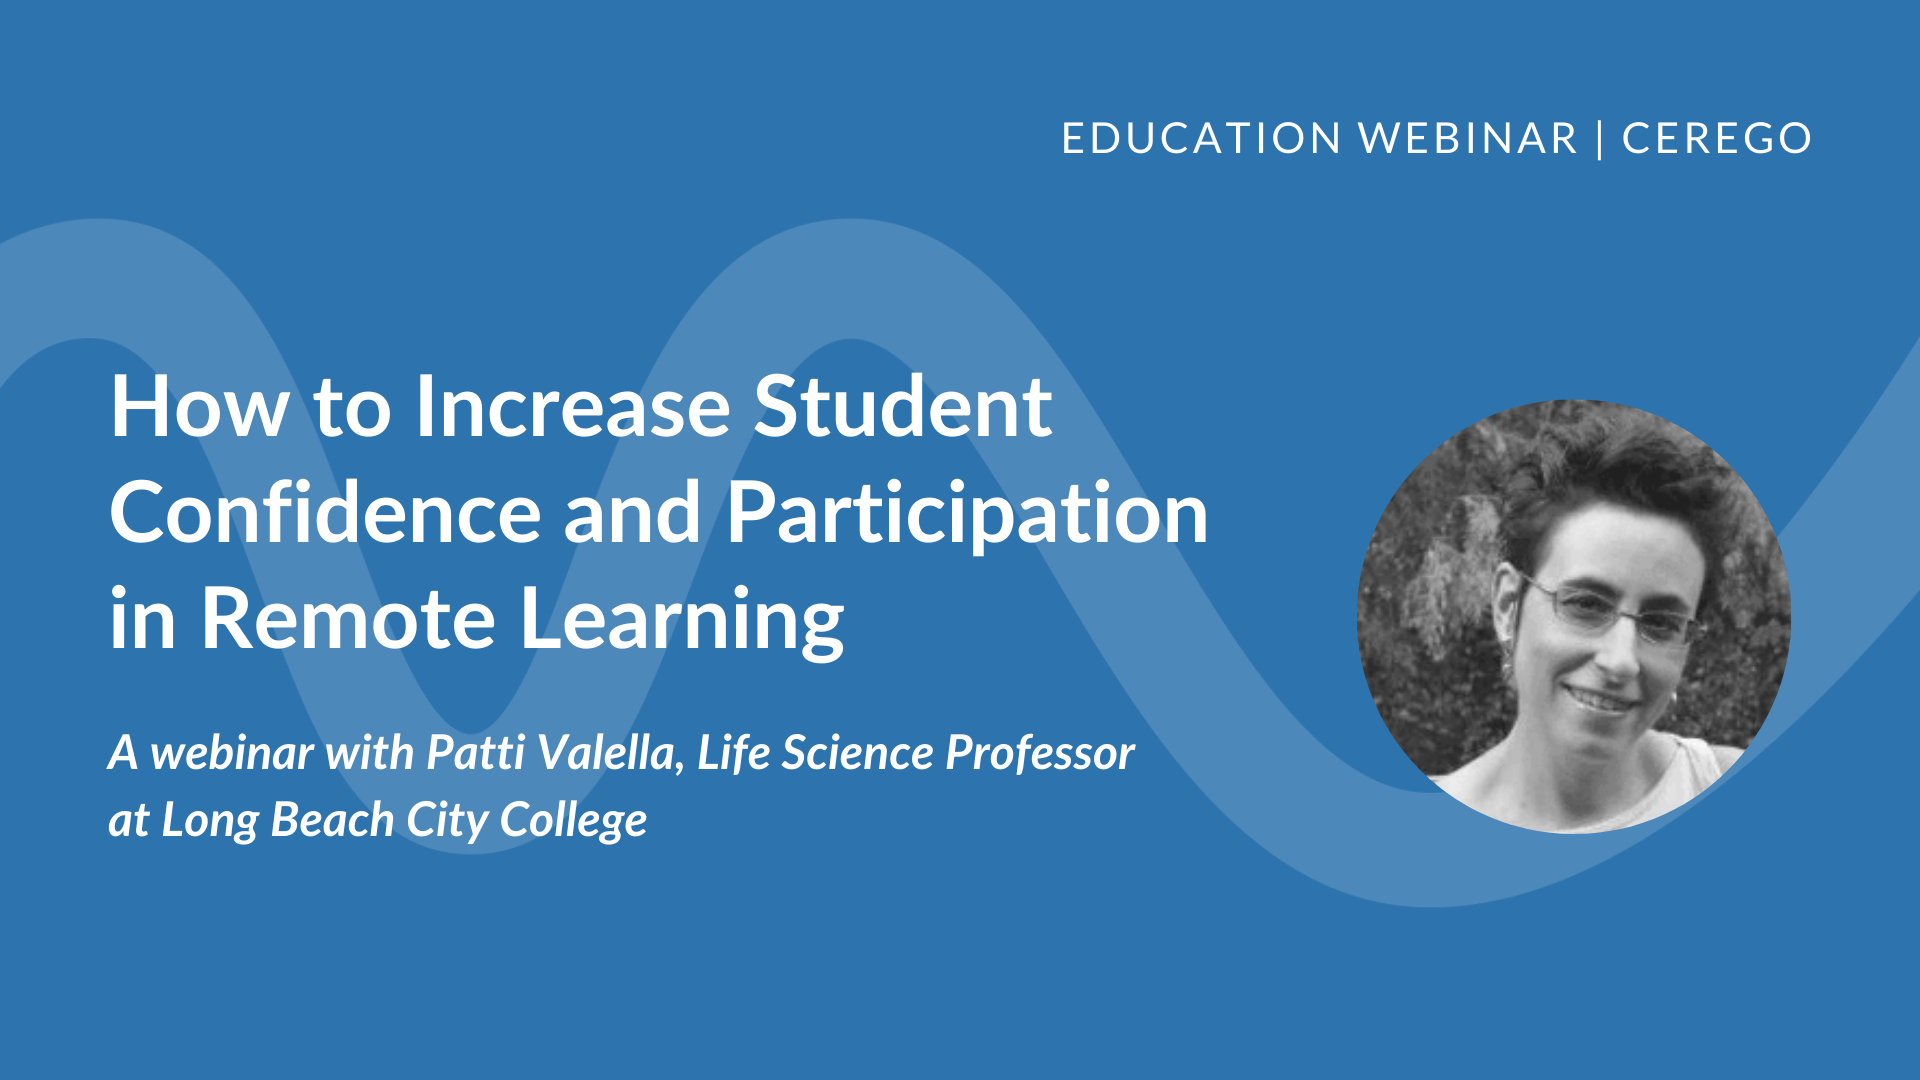 How to Increase Student Confidence and Participation in Remote Learning | Cerego Webinar